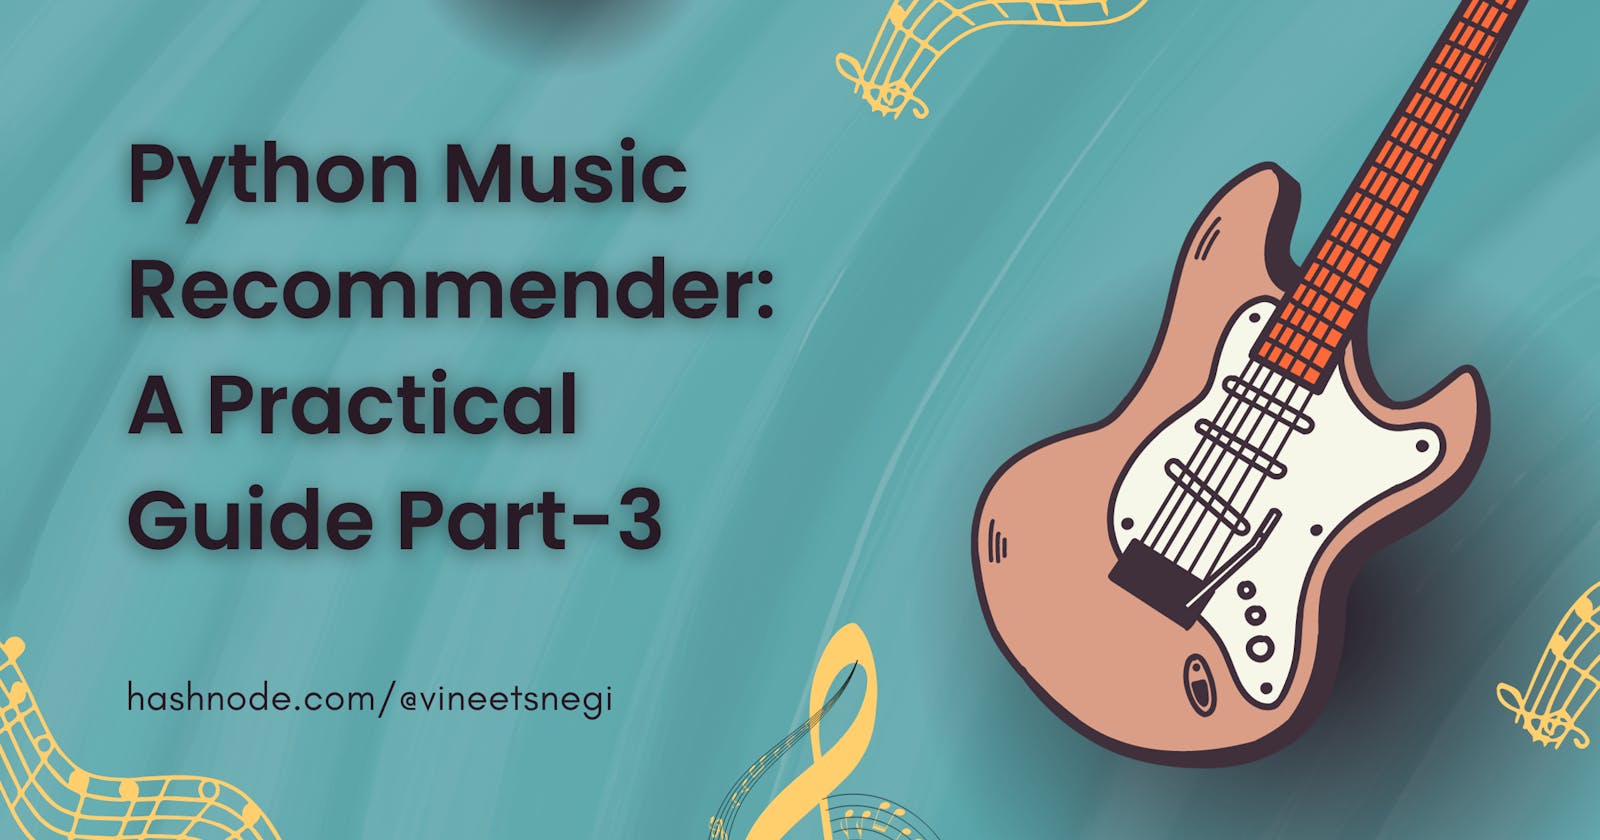 Python Music Recommender: A Practical Guide Part-3